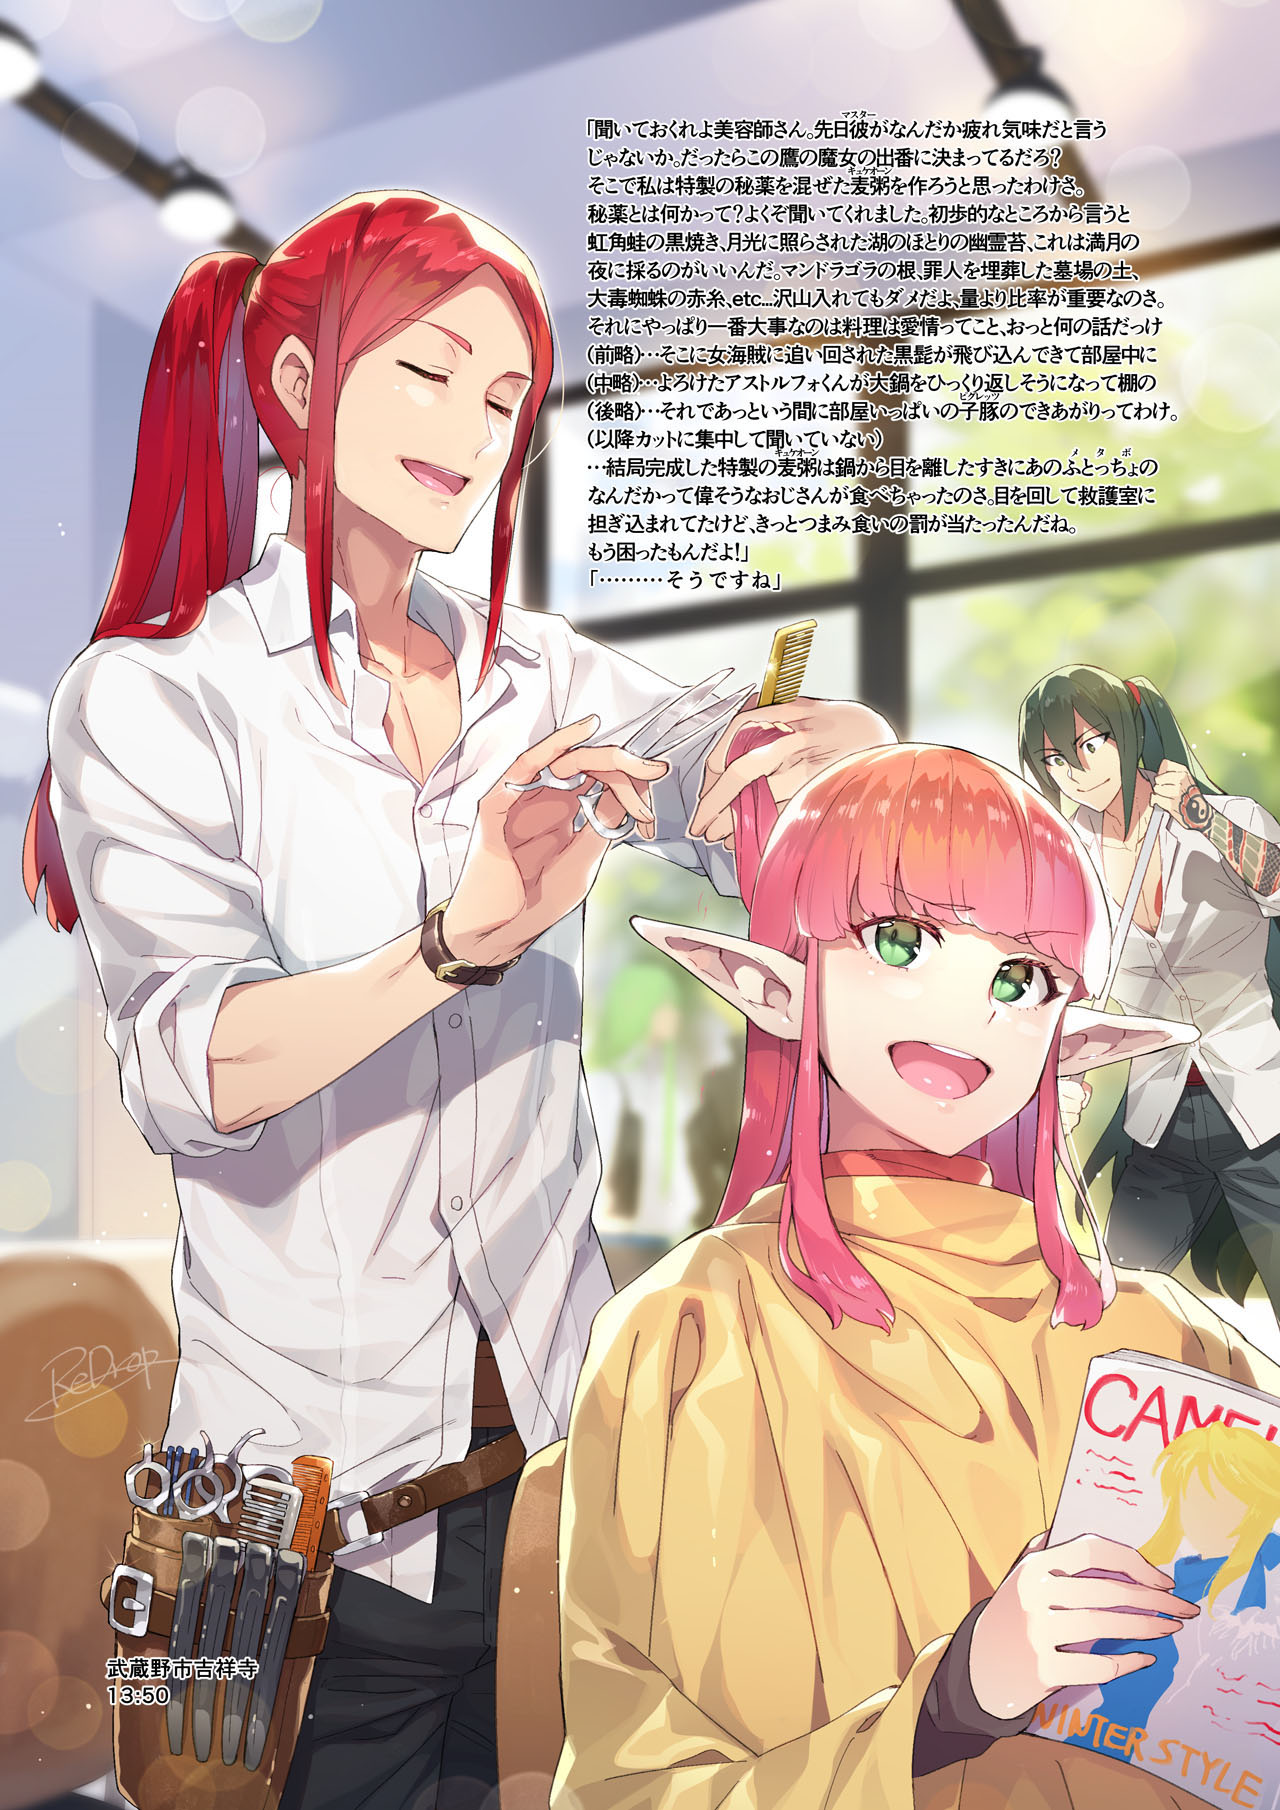 1girl 2boys alternate_costume bangs circe_(fate/grand_order) closed_eyes eyebrows_visible_through_hair fate/grand_order fate_(series) hair_between_eyes hairdressing highres long_hair looking_back magazine multiple_boys pointy_ears ponytail red_hair redrop smile tattoo translation_request tristan_(fate/grand_order) yan_qing_(fate/grand_order)